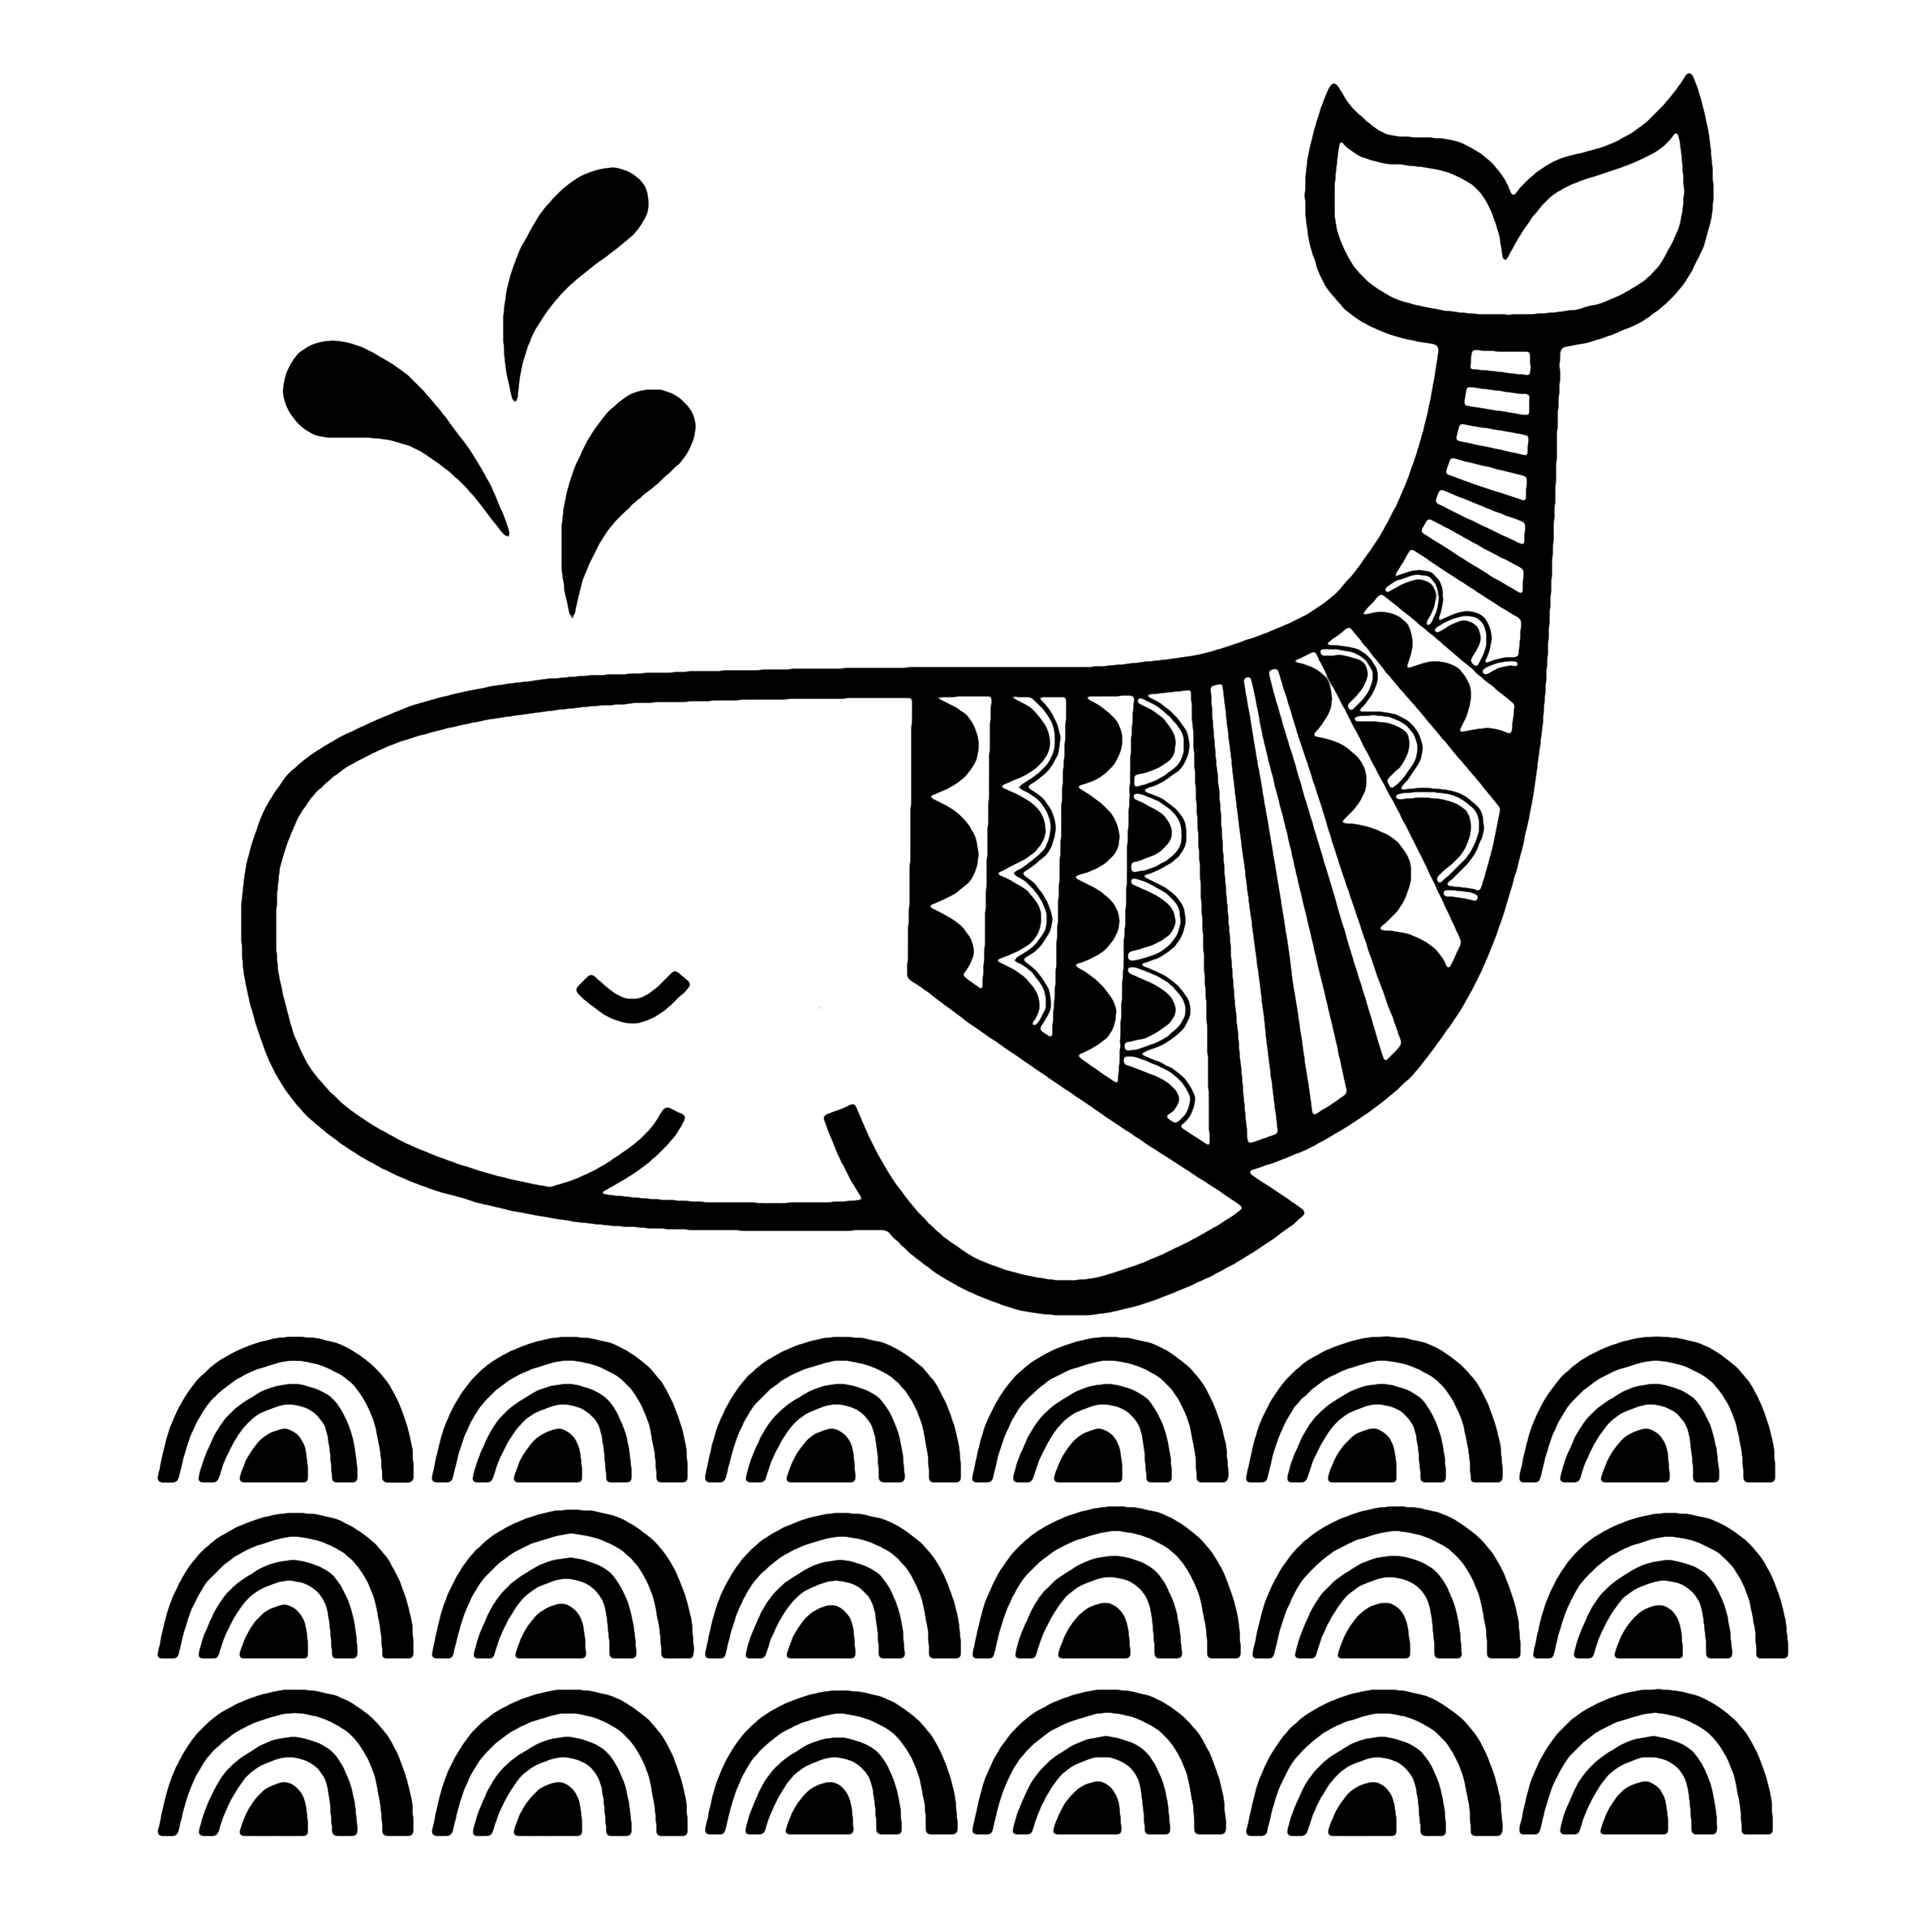 A monochrome black line drawing of a whale on white background. The whale has a little smile and a closed eye, and three black water drops coming from her blowhole. The back end of the whale is decorated with a pattern of semicircles in stripes and there are similarly regularly patterned waves made up of concentric semi-circles underneath, layered in three lines on top of each other.